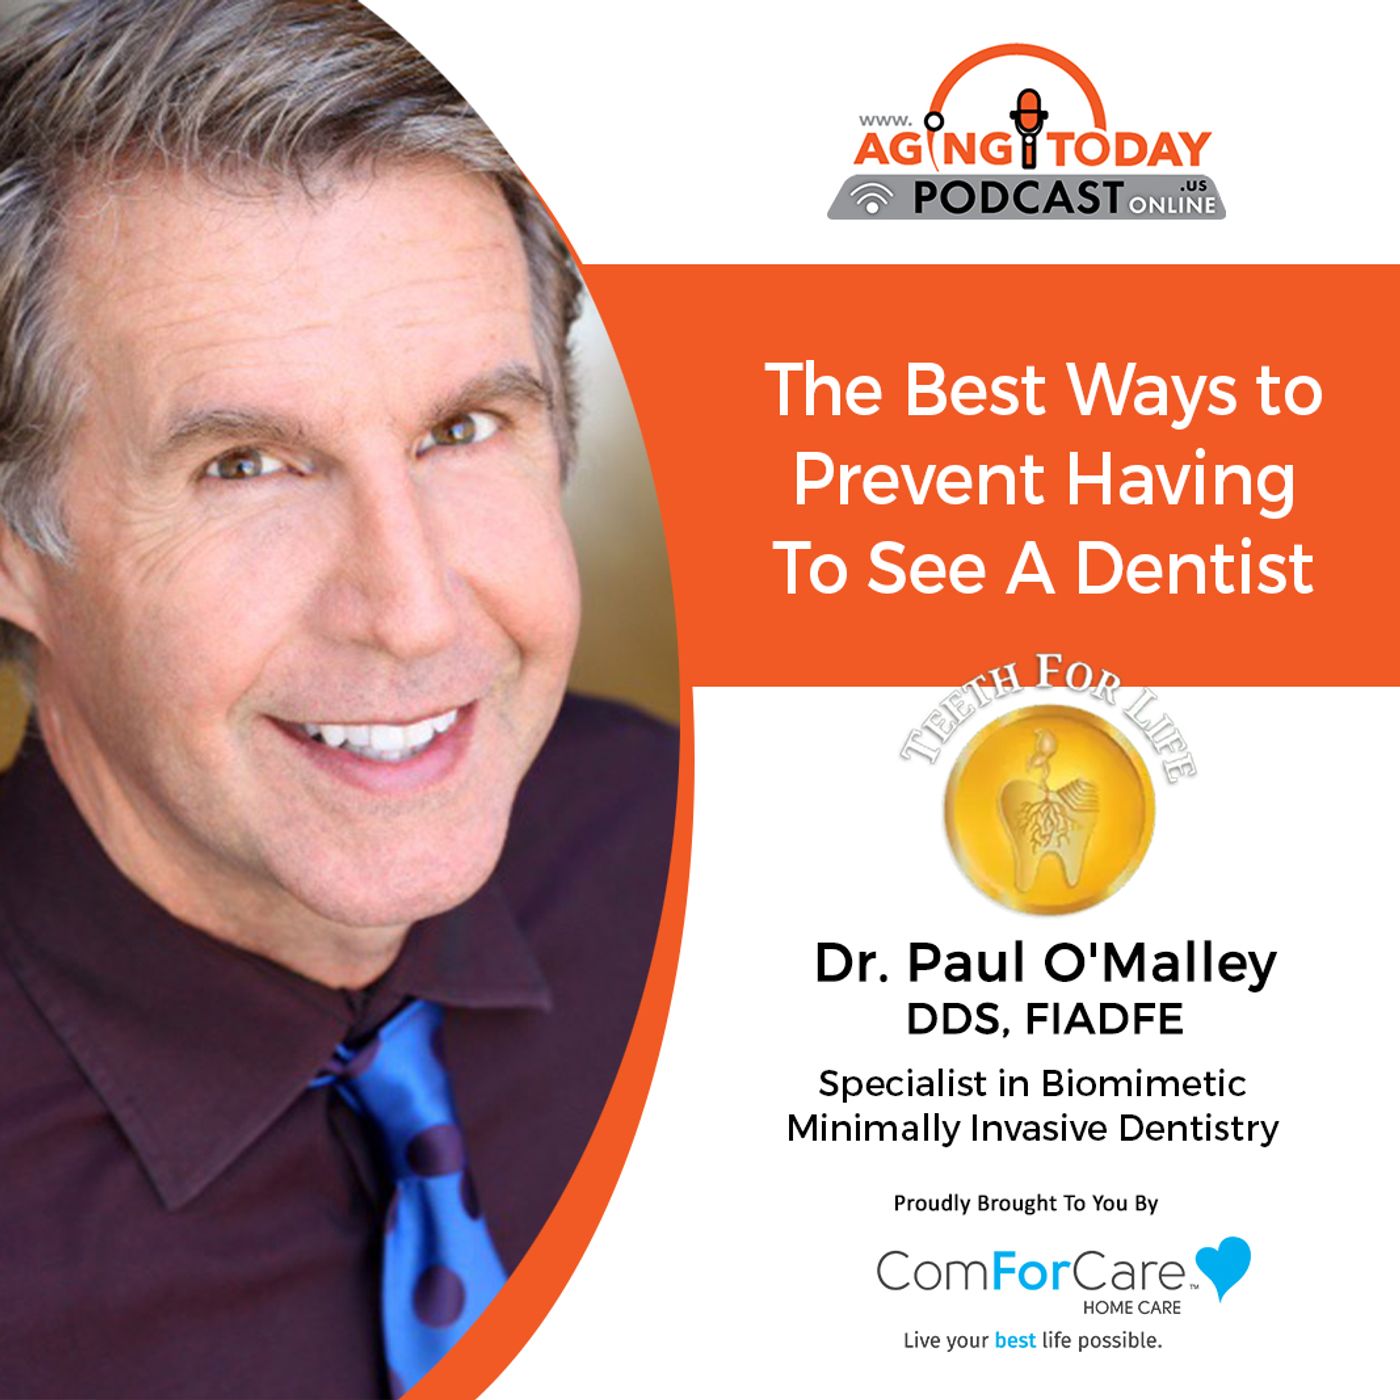 2/6/23: Dr. Paul O'Malley, DDS, FIADFE, and Specialist in Biomimetic Minimally Invasive Dentistry | The Best Ways to Prevent Having to See a